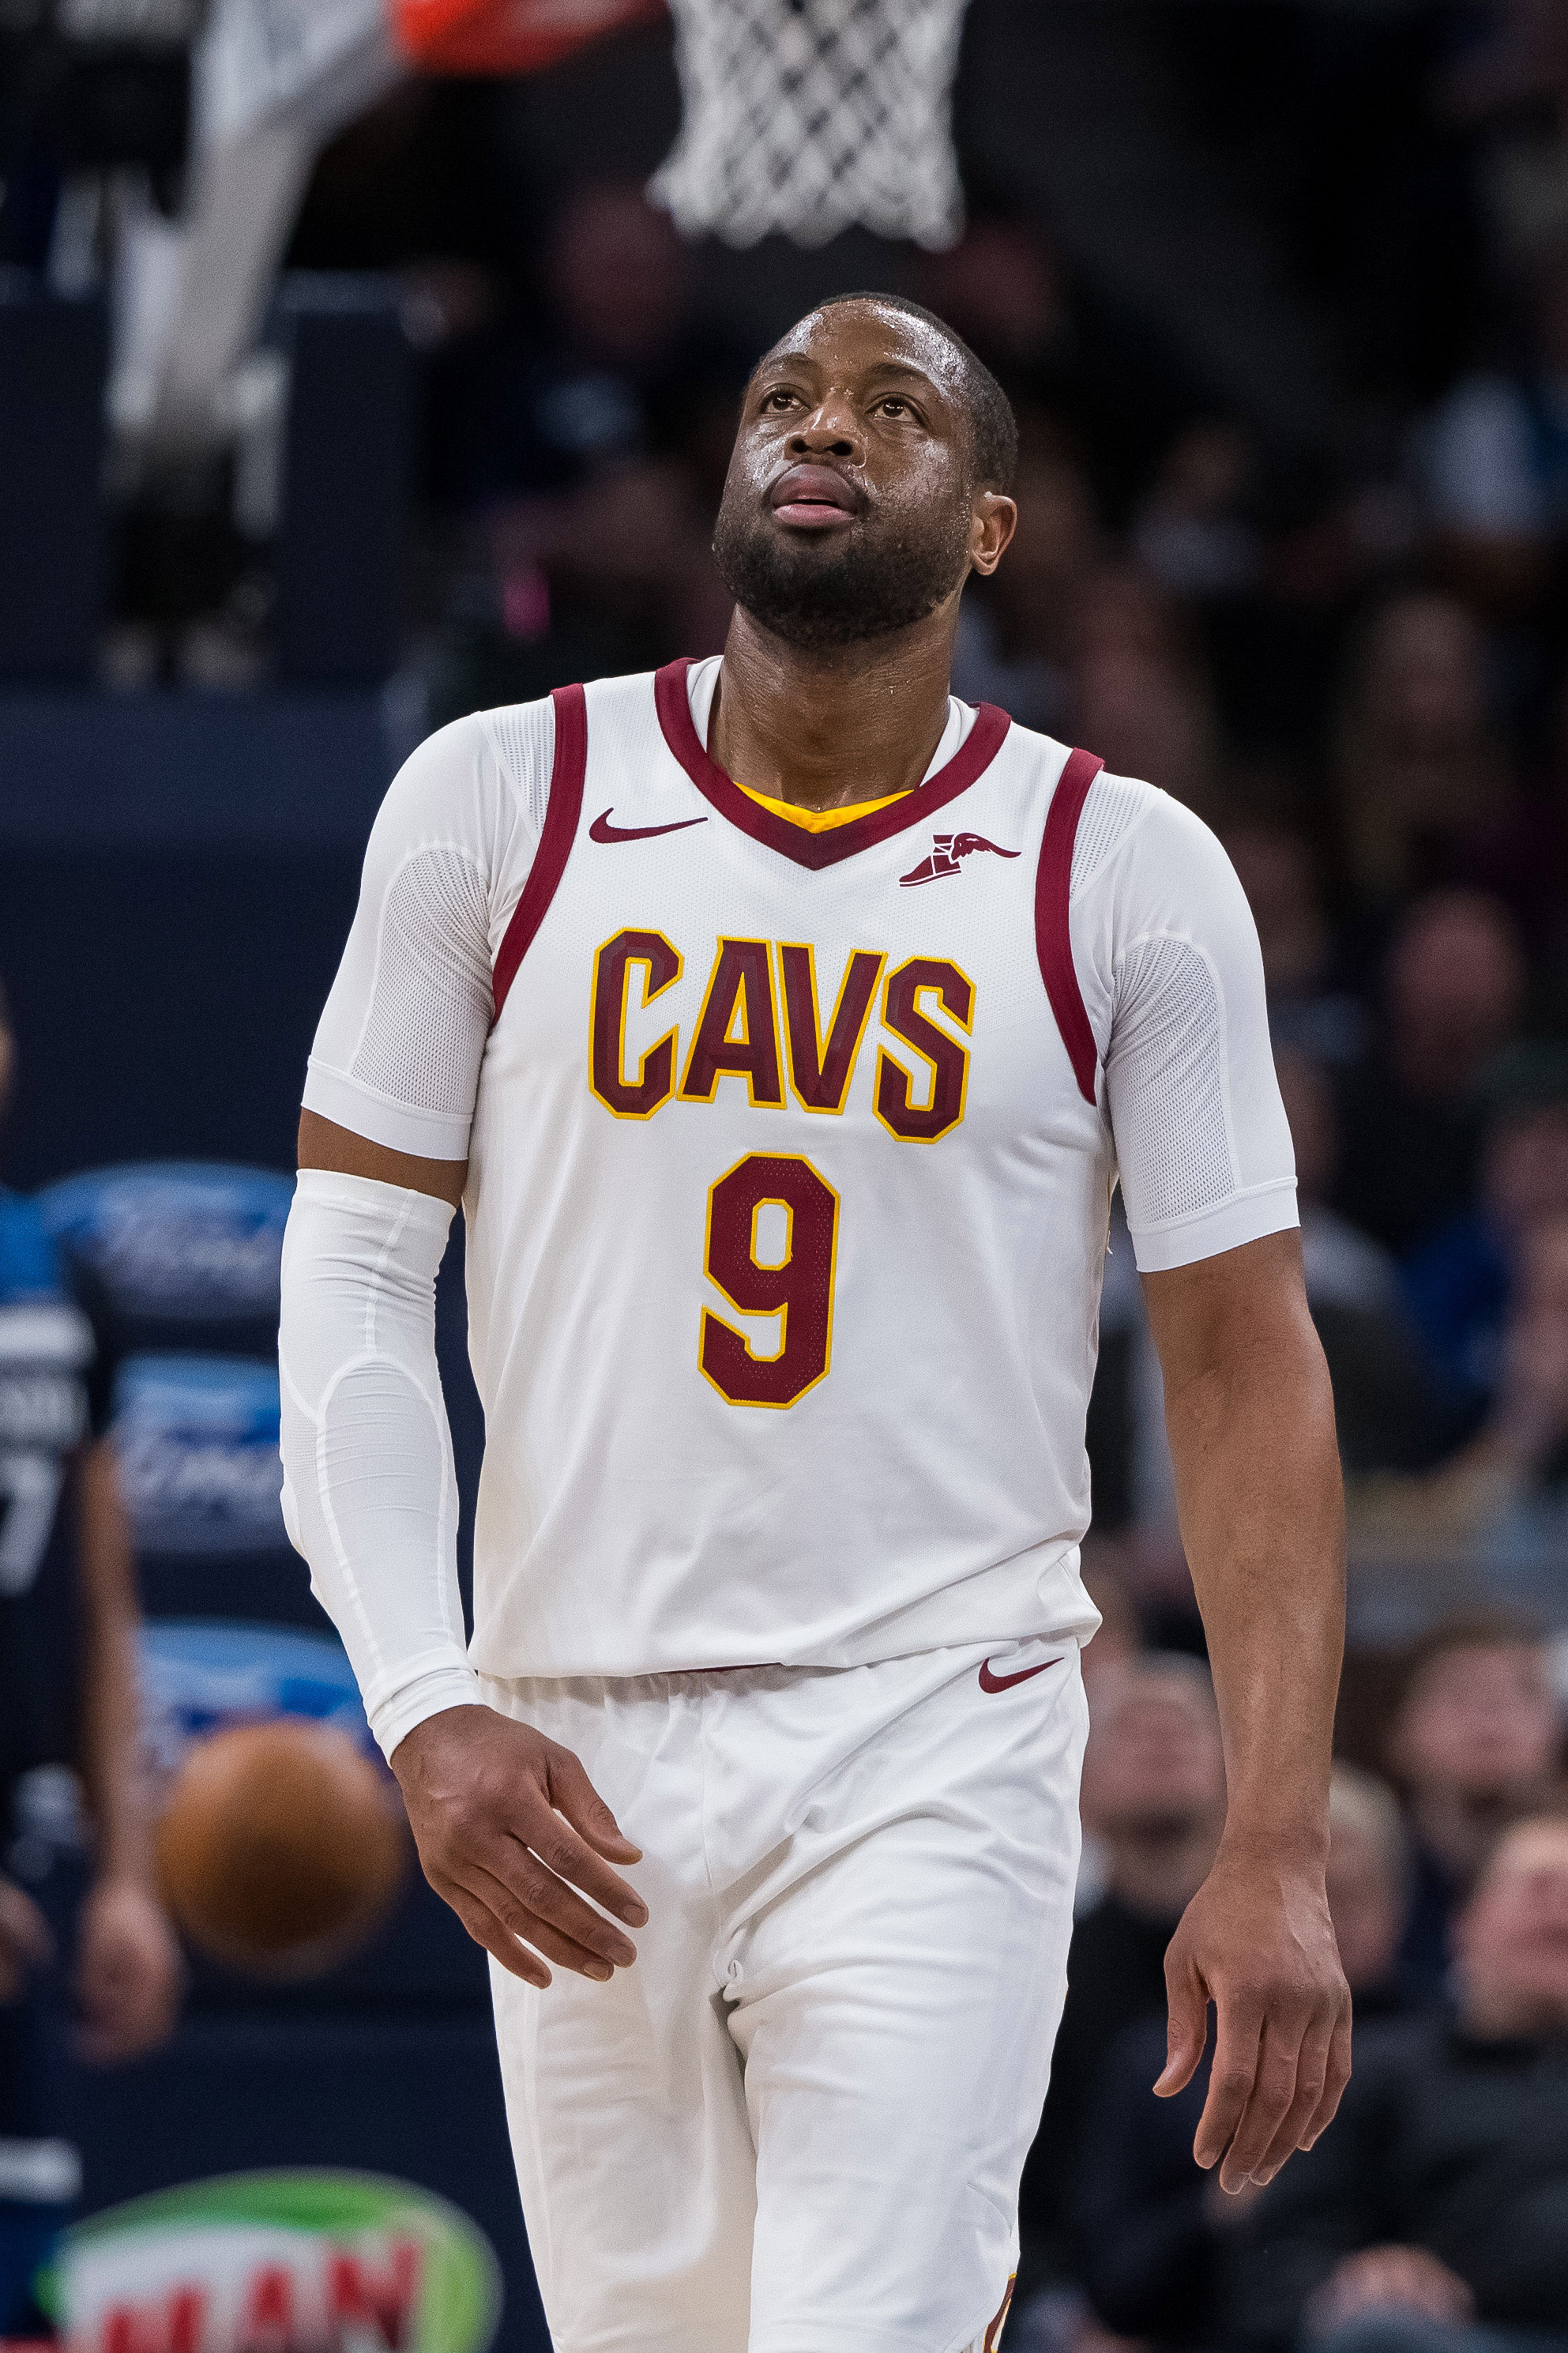 Dwyane Wade will wear No. 9 with Cleveland Cavaliers